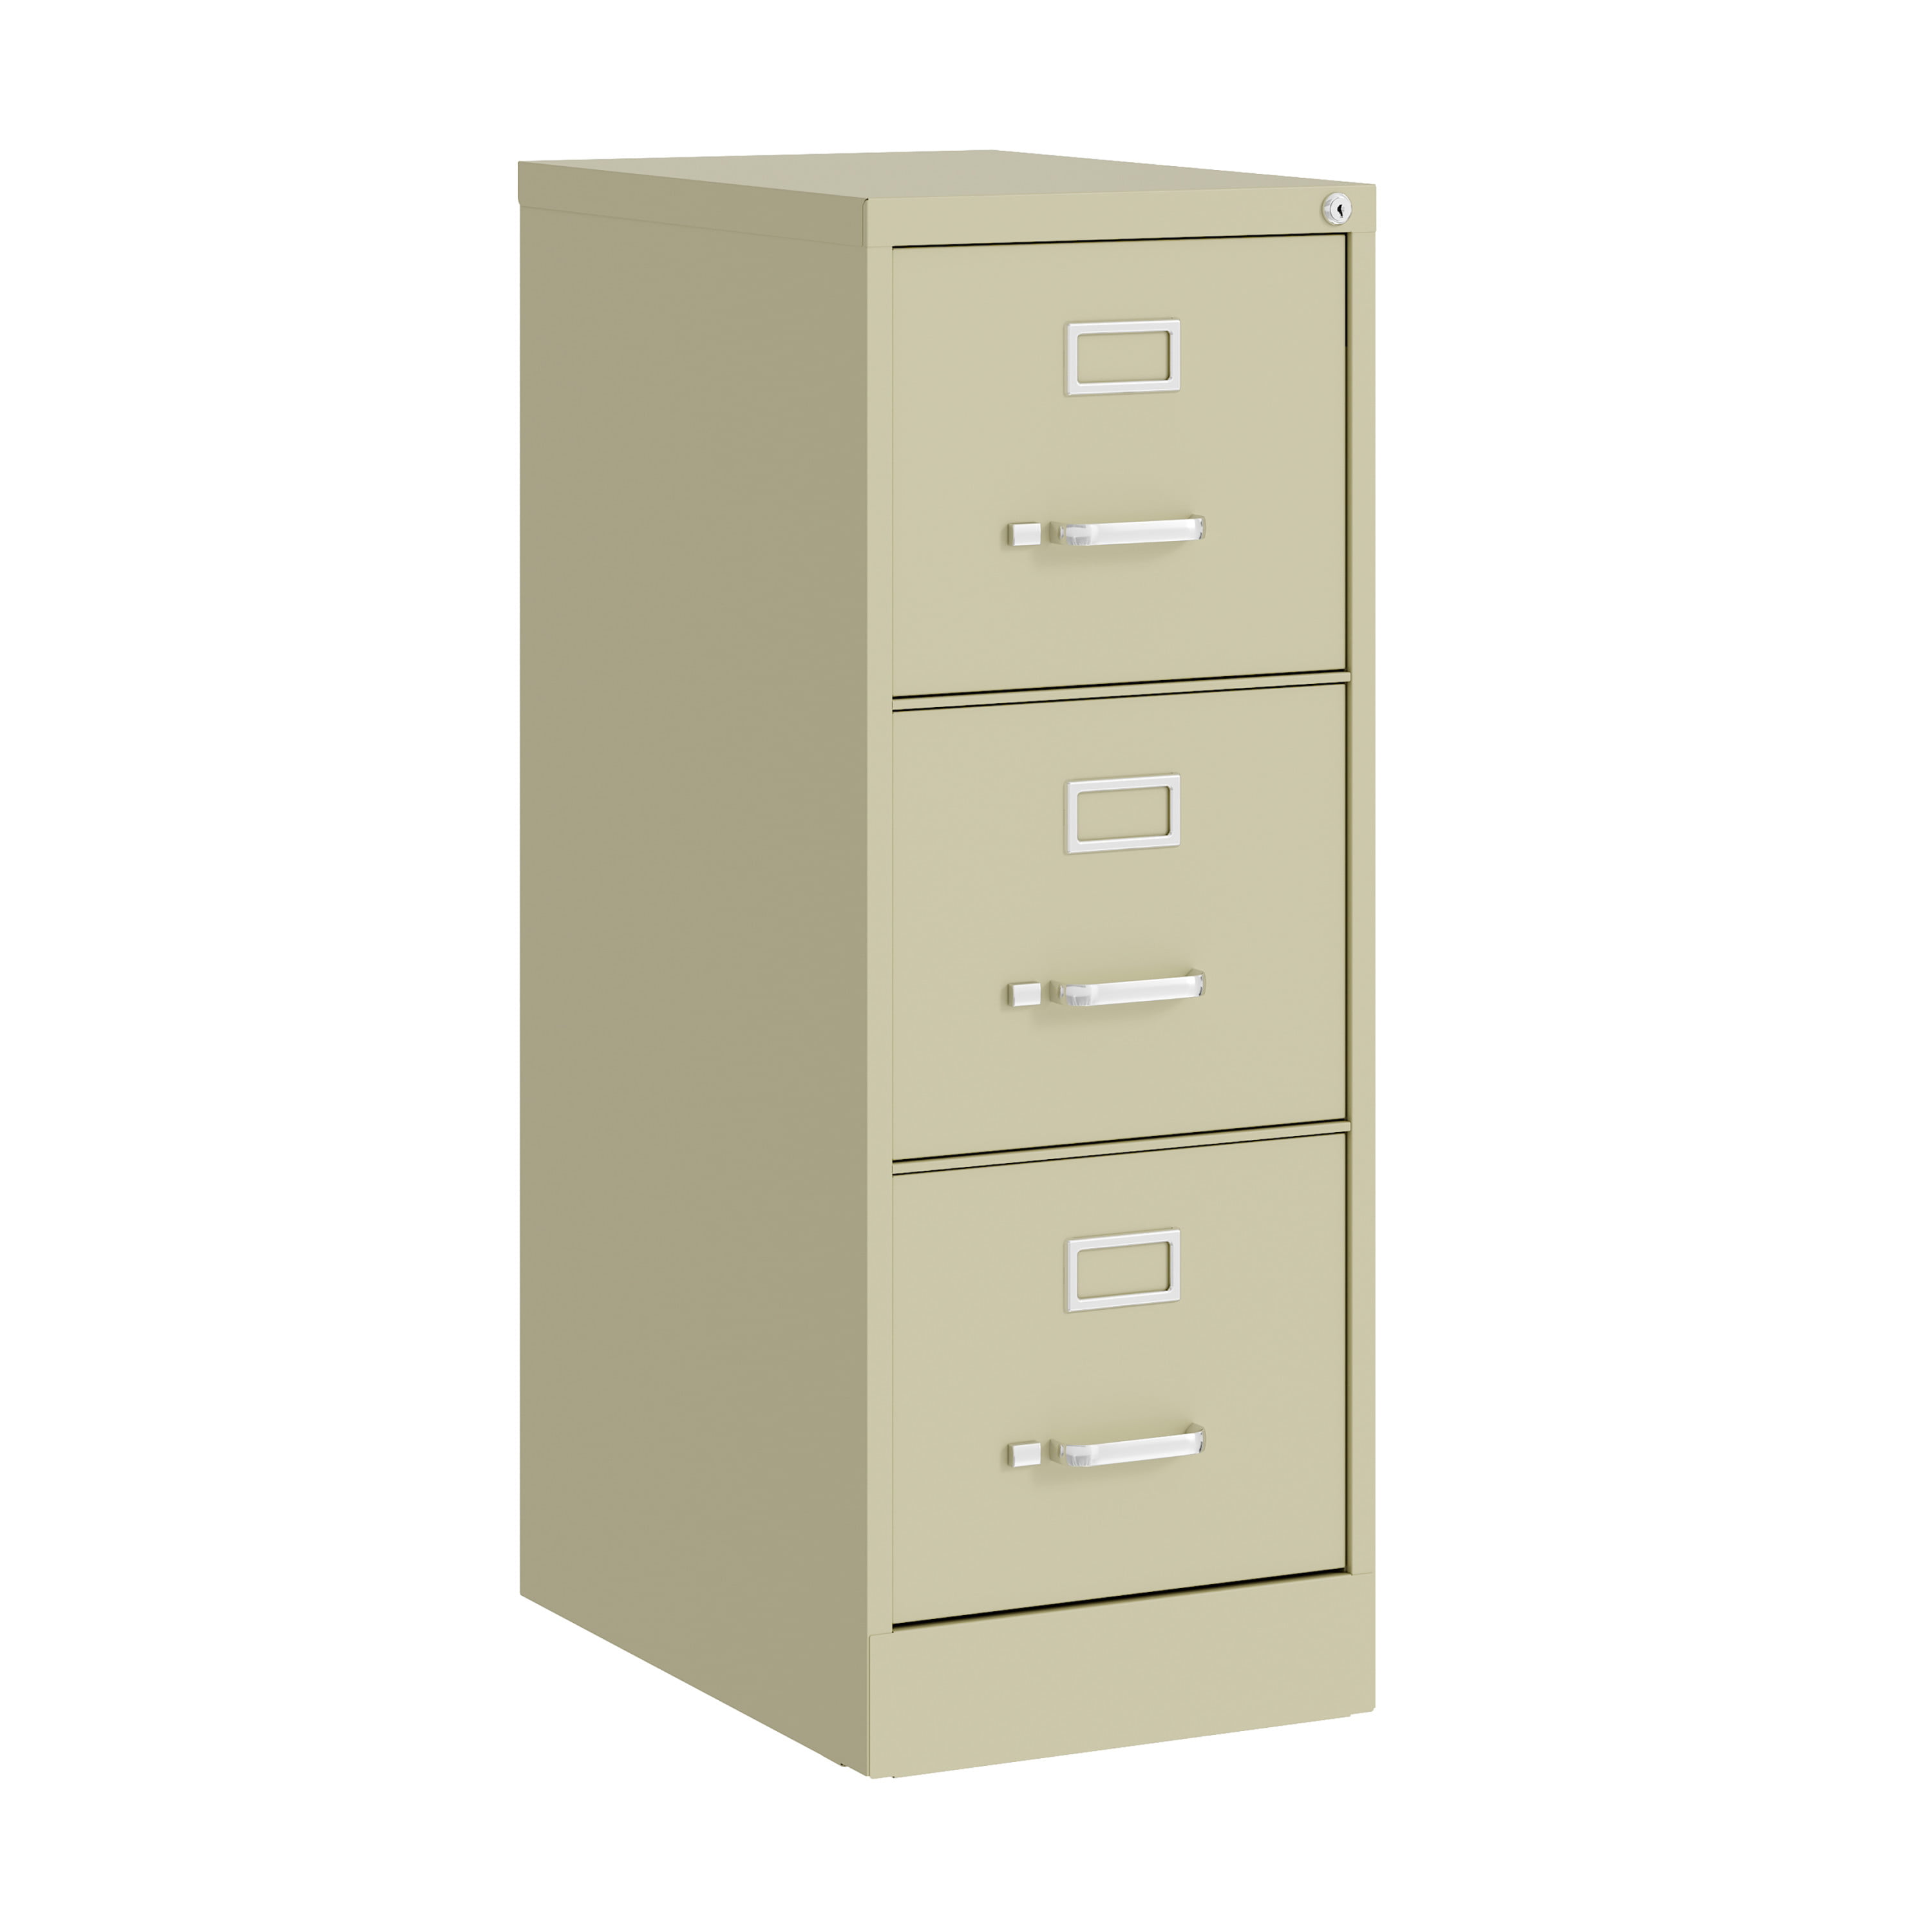 White SPHC-HCCBN003-W-CA SogesPower 3 Drawer Mobile File Cabinet with Lock 